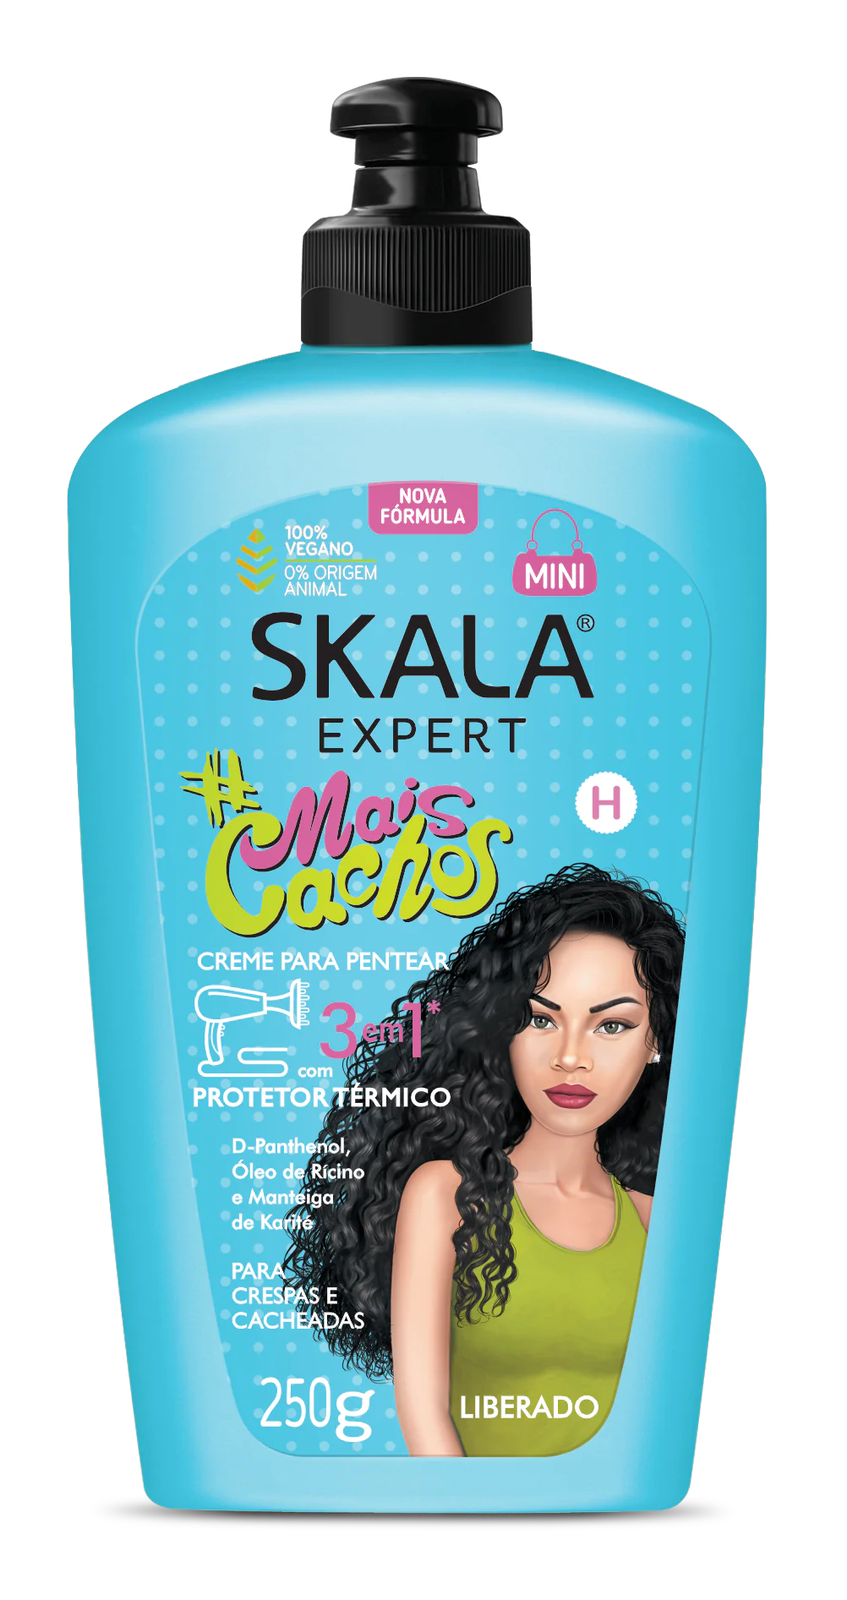 Mais Cachos Leave-in Conditioner 2 in 1 - Skala (250g)